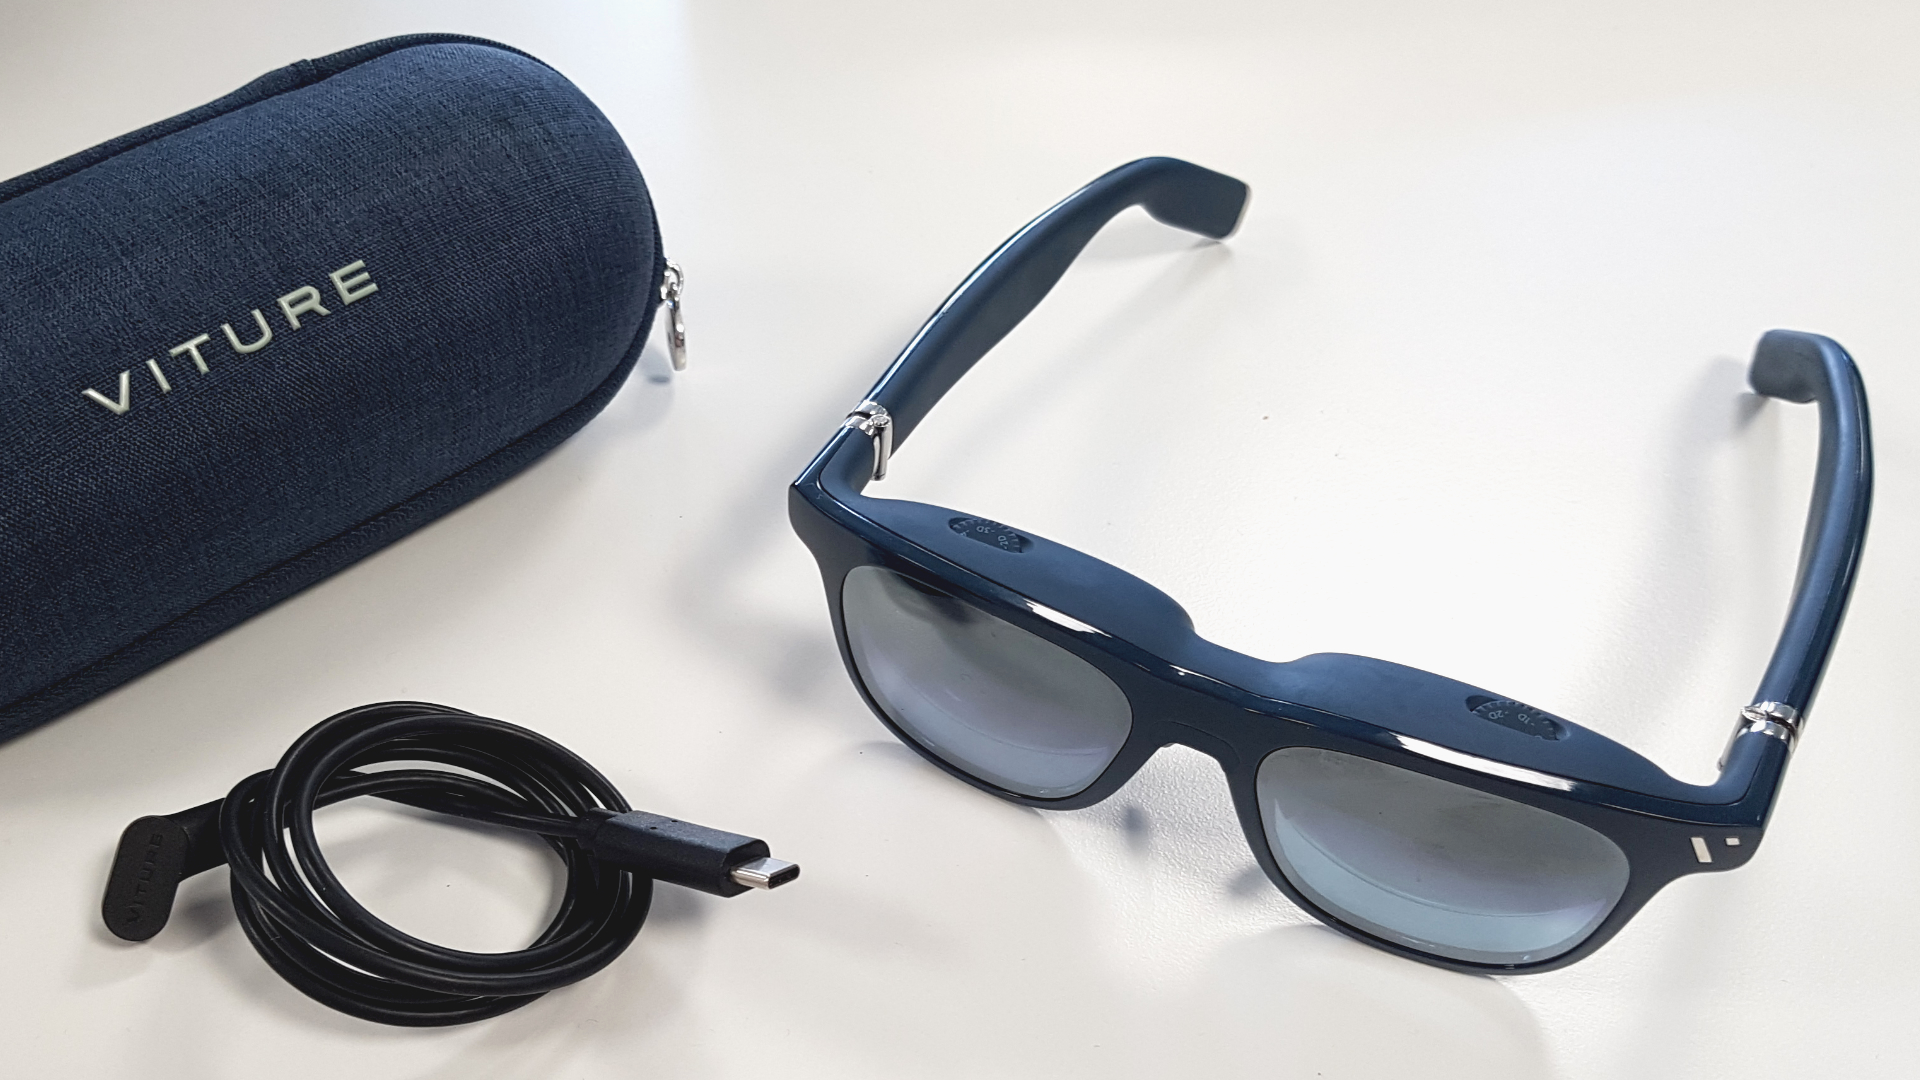 Viture One XR glasses close with case and cable.